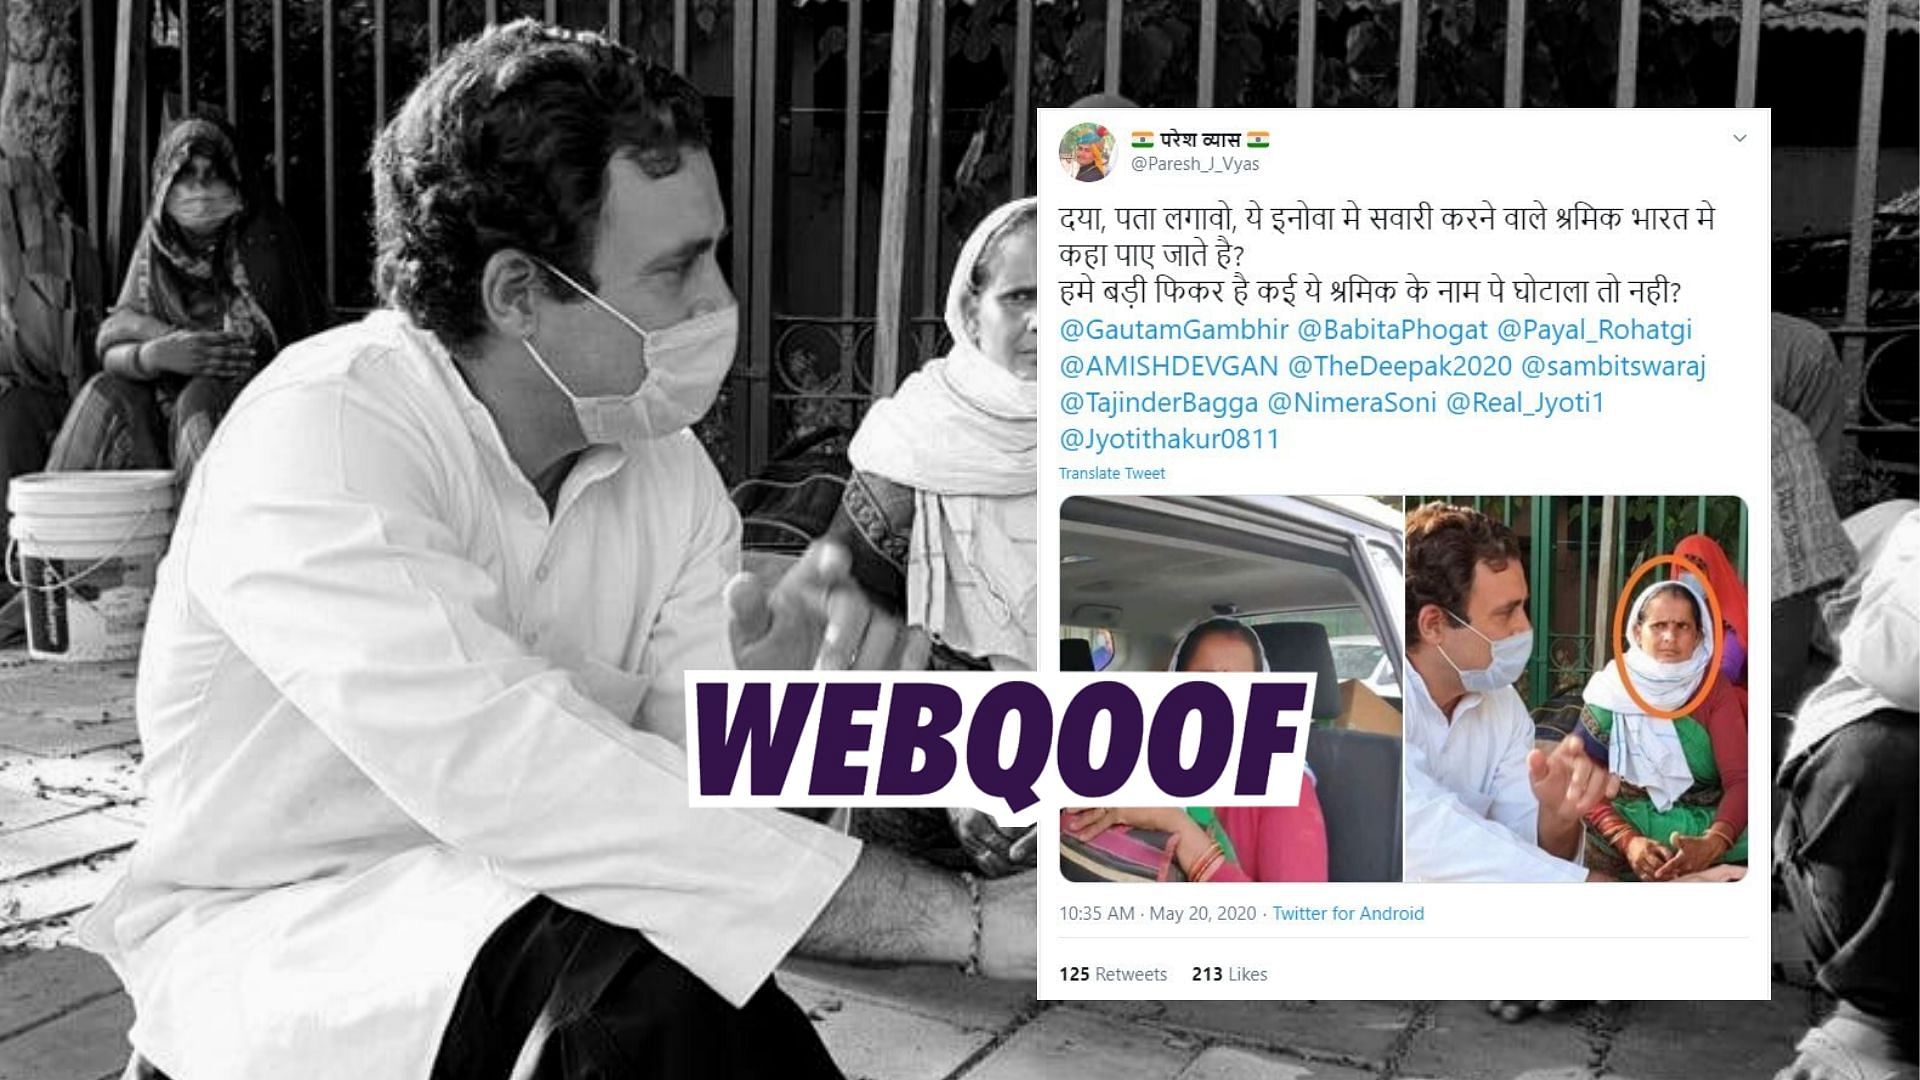 Images of Rahul Gandhi meeting migrants in Delhi are being shared with misleading claims.